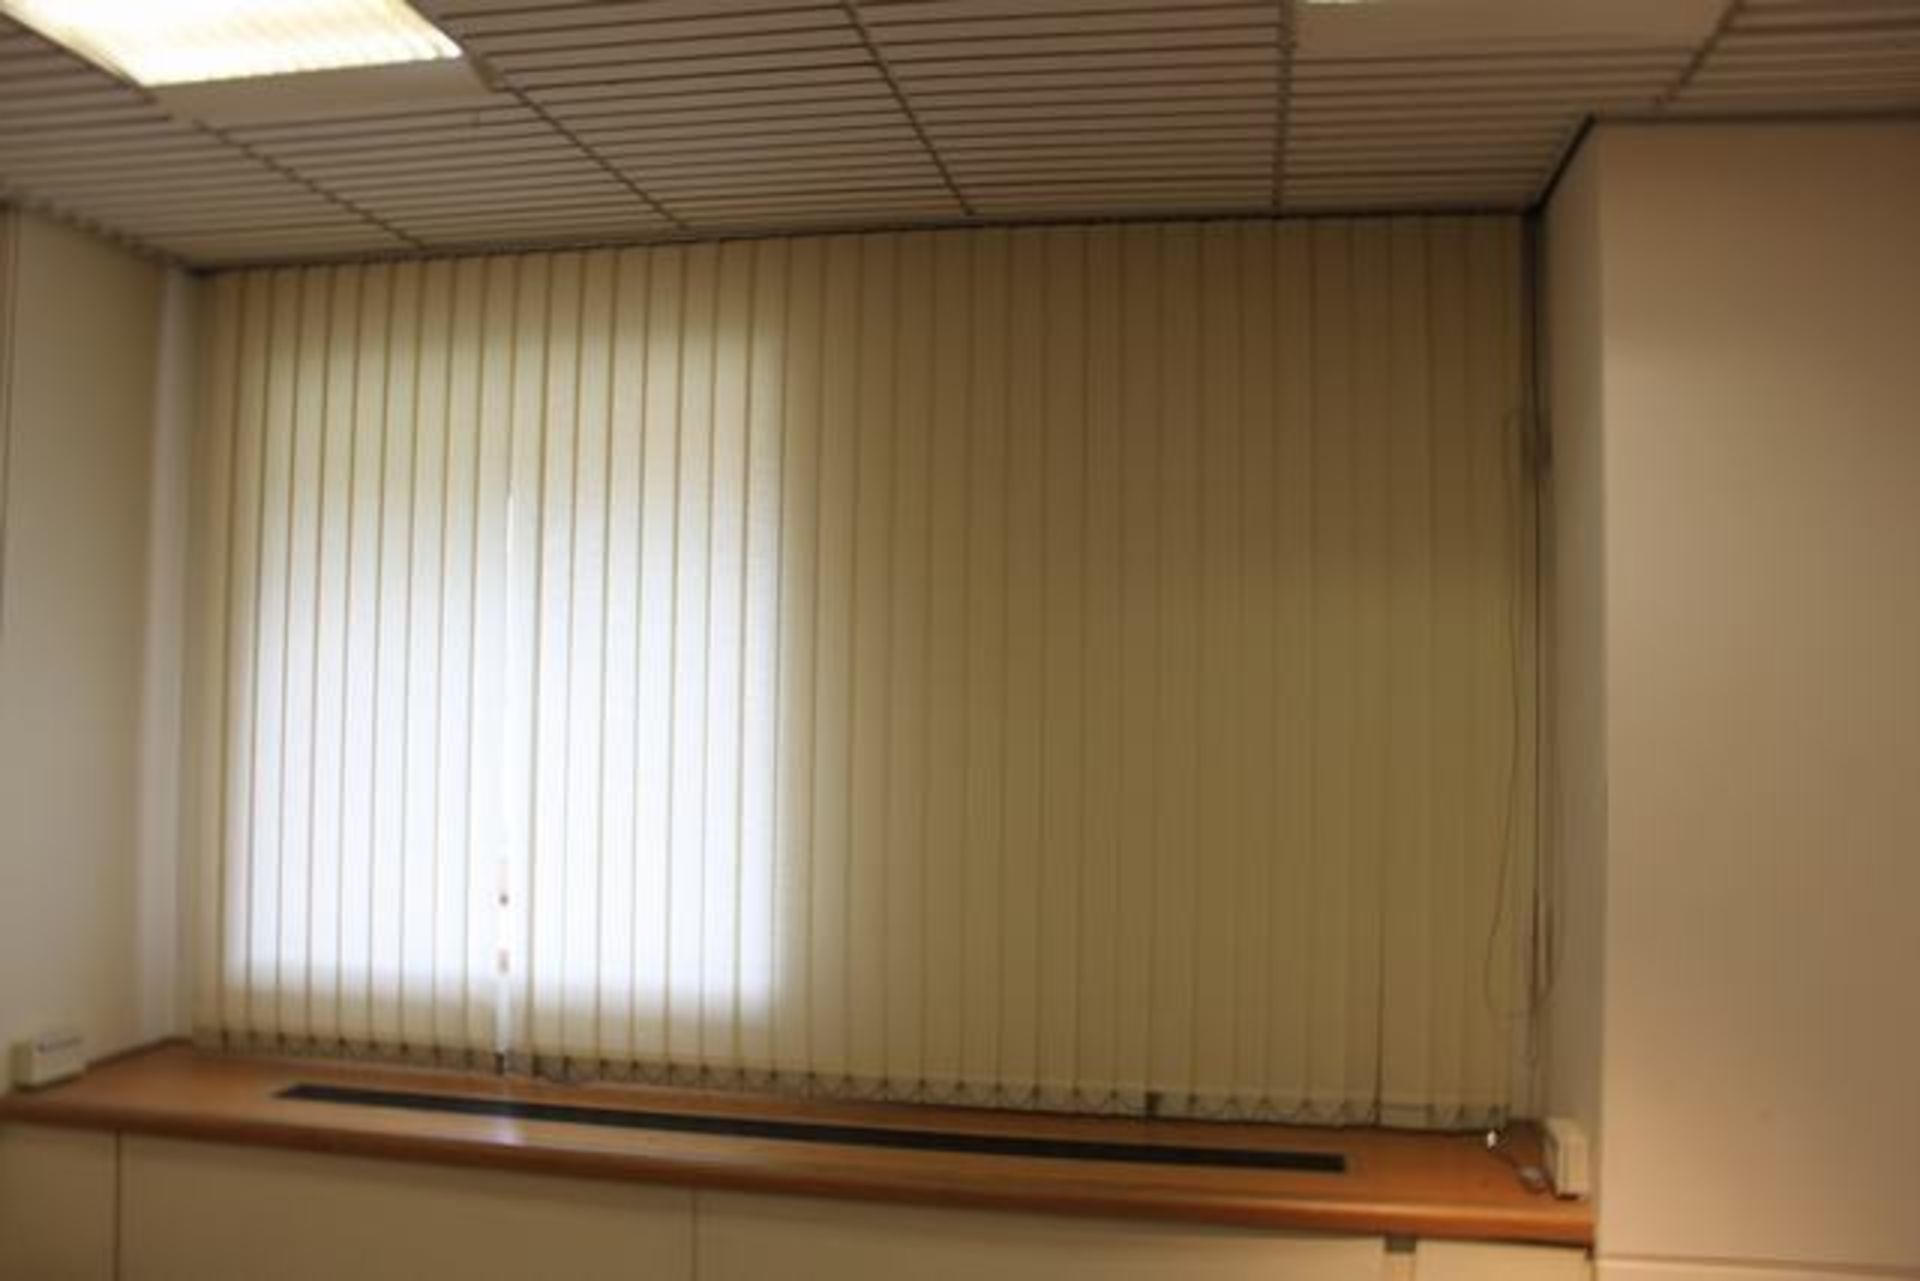 Vertical blind cream 2800mm x 1800mm complete with robust aluminium head rail with beaded tilt chain